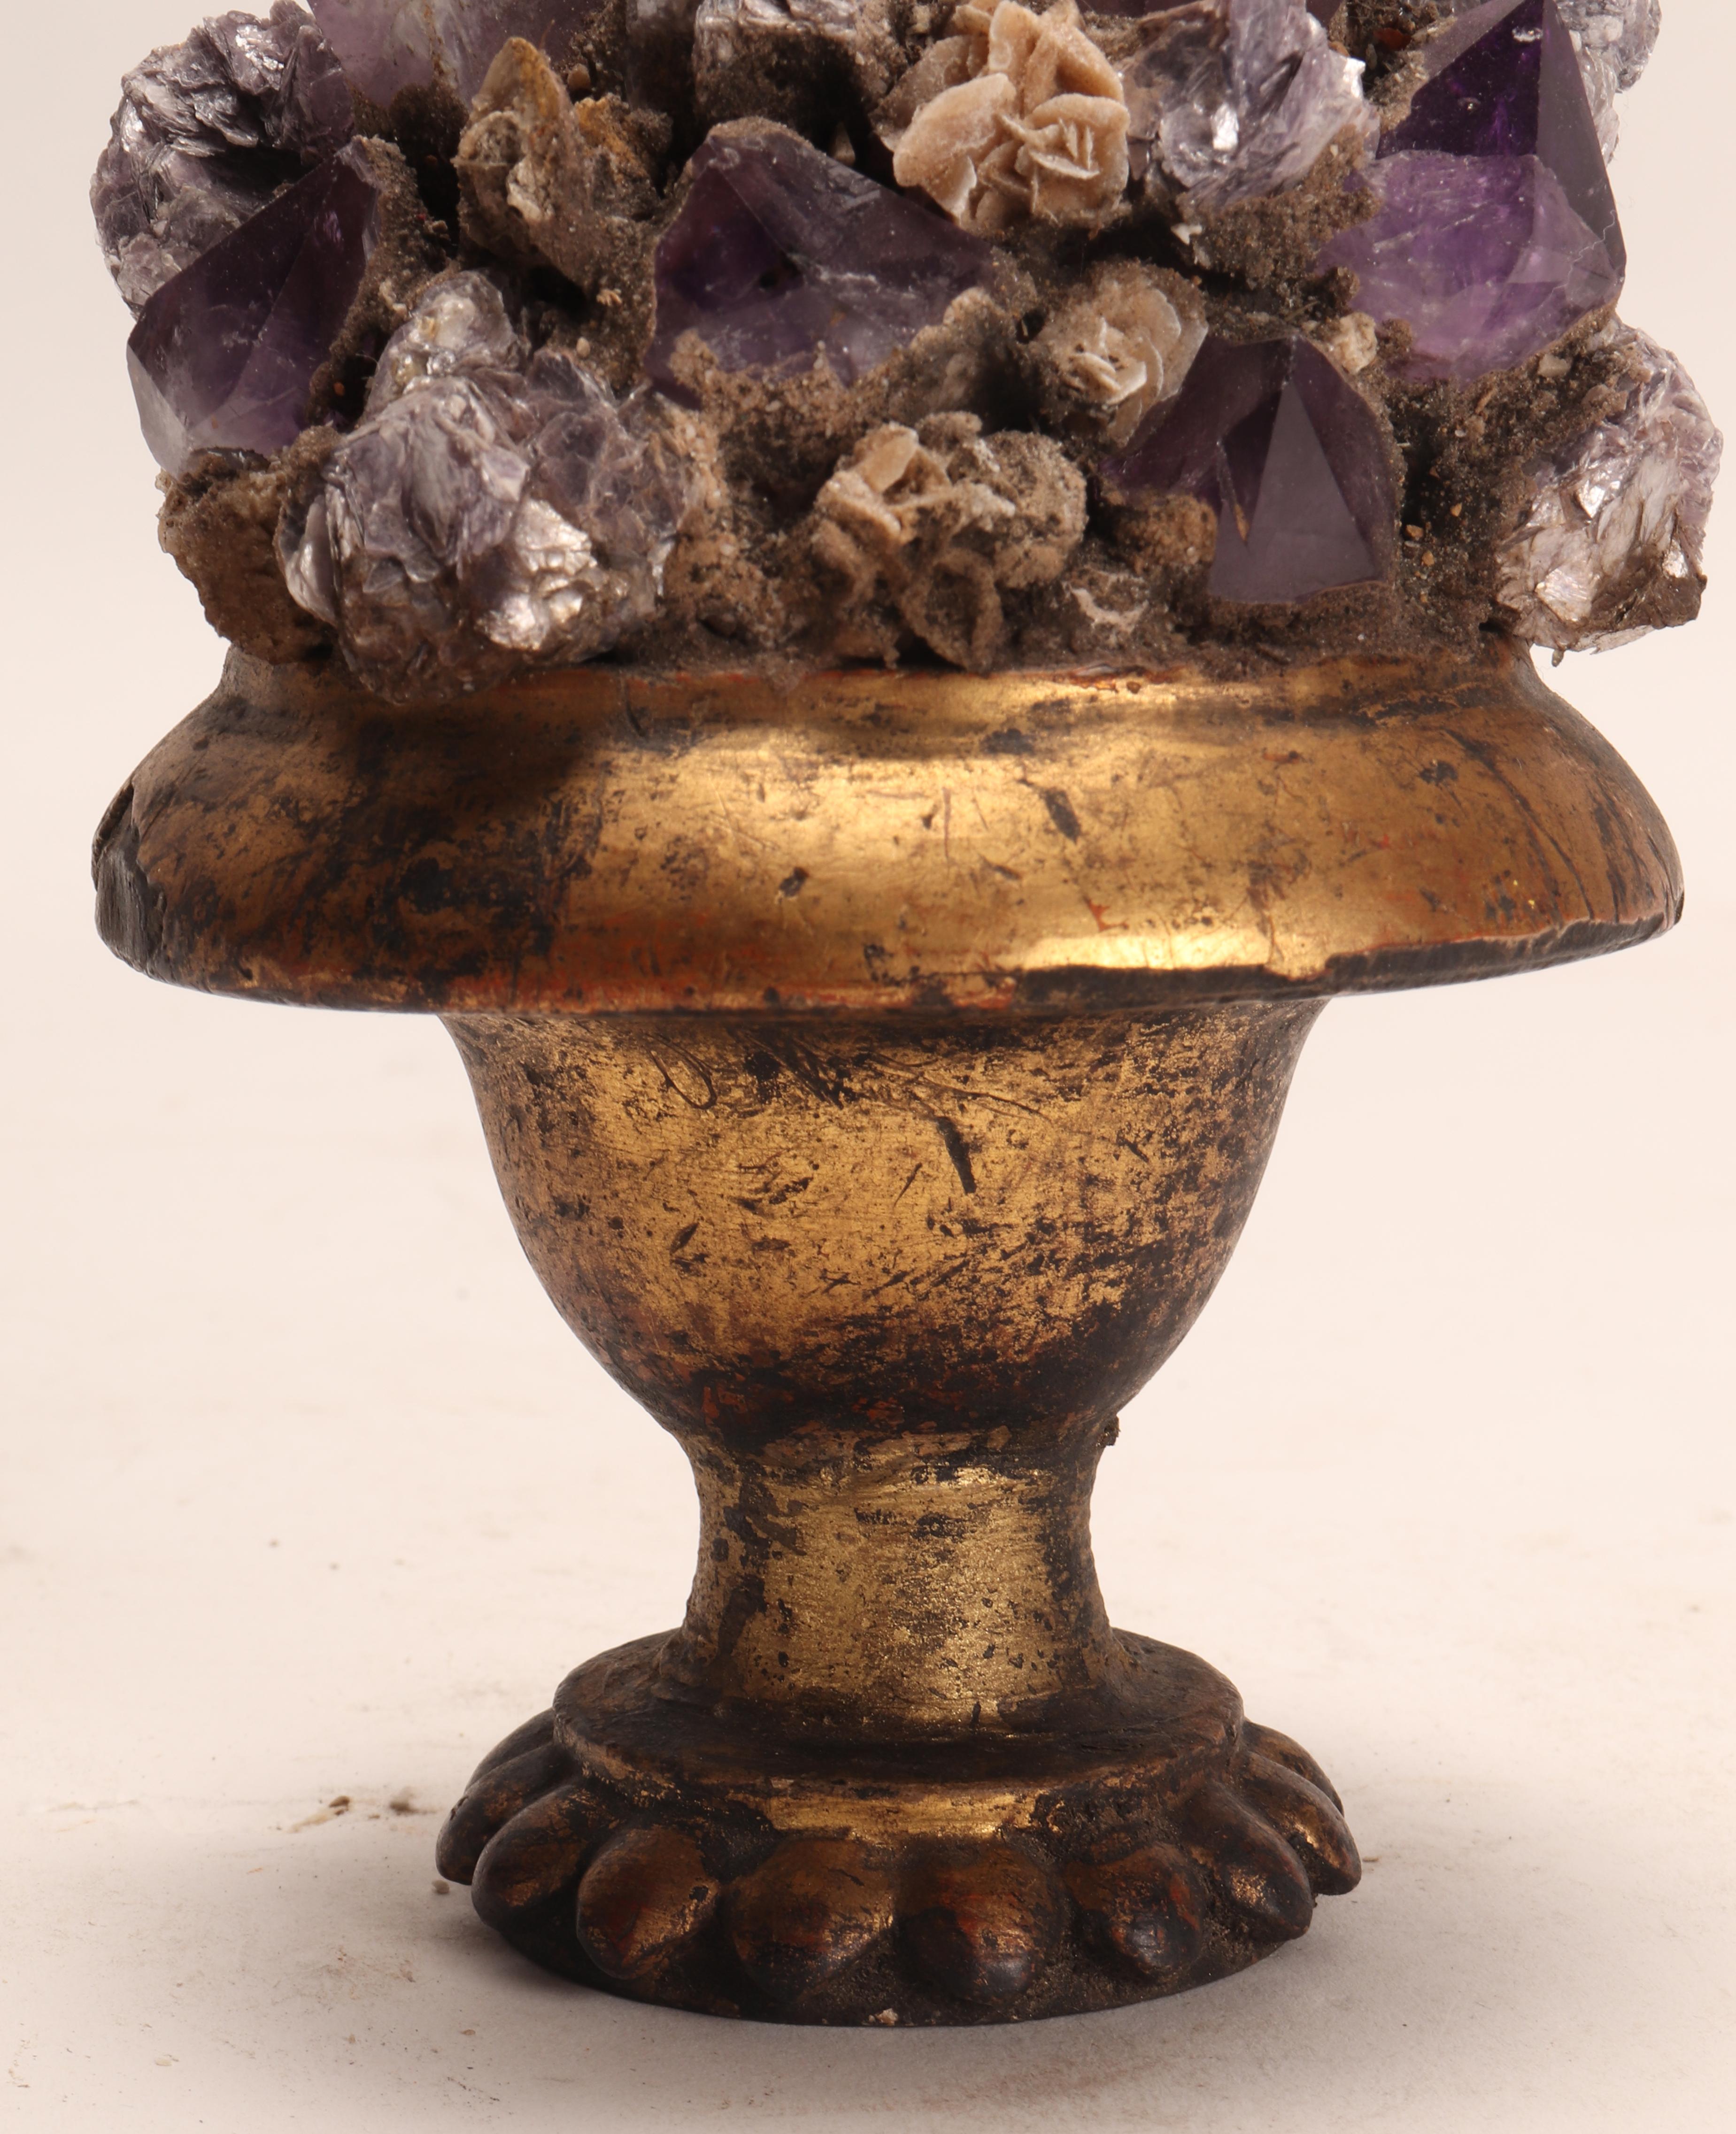 A Naturalia mineral specimen. A druse with amethyst, mica and desert rose crystals, mounted over a guild-plated wooden base on a vase shape. Italy circa 1880.